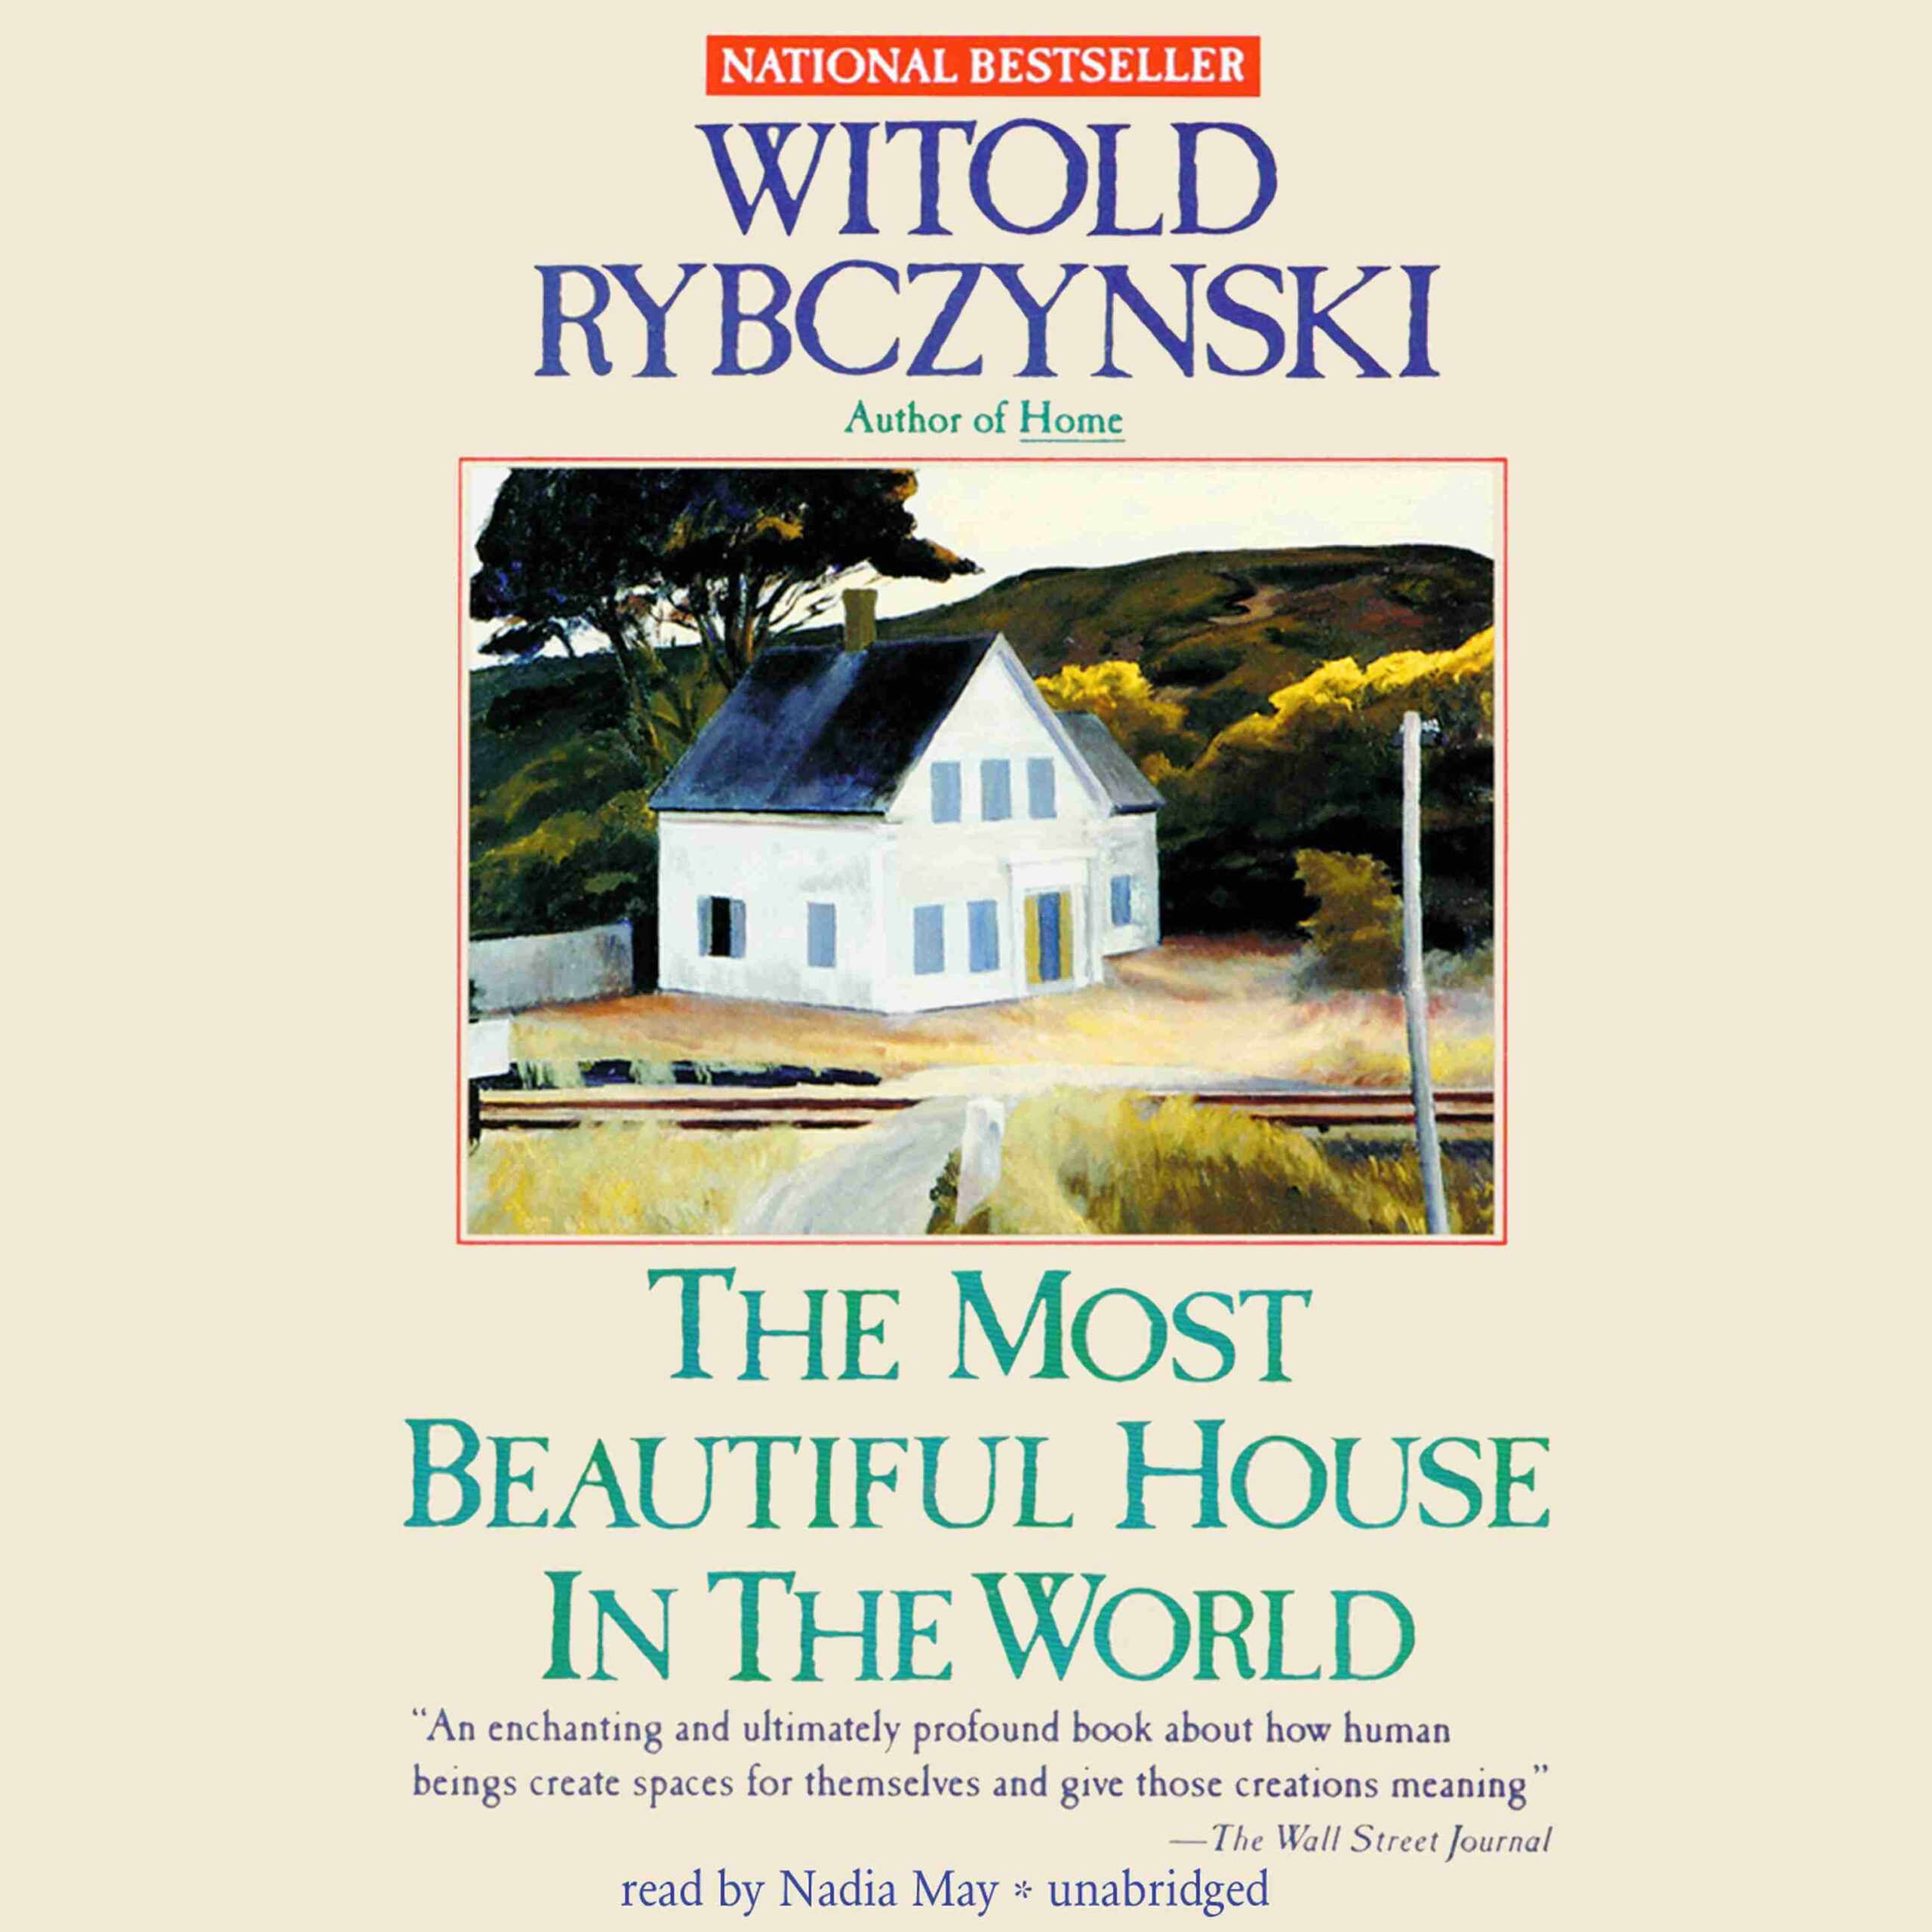 The Most Beautiful House in the World byWitold Rybczynski Audiobook. 16.95 USD